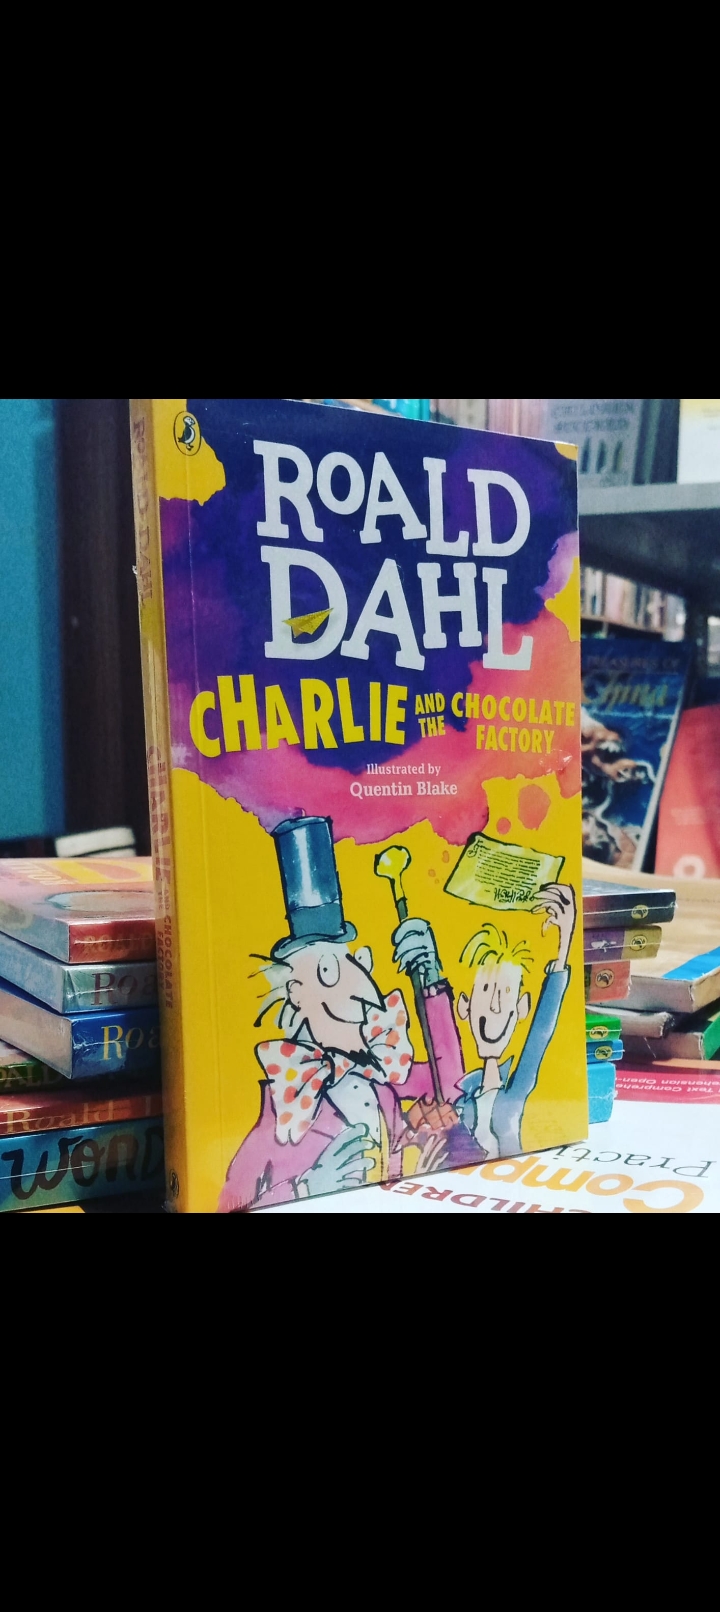 charlie and the chocolate factory by roald dahl. new paperback